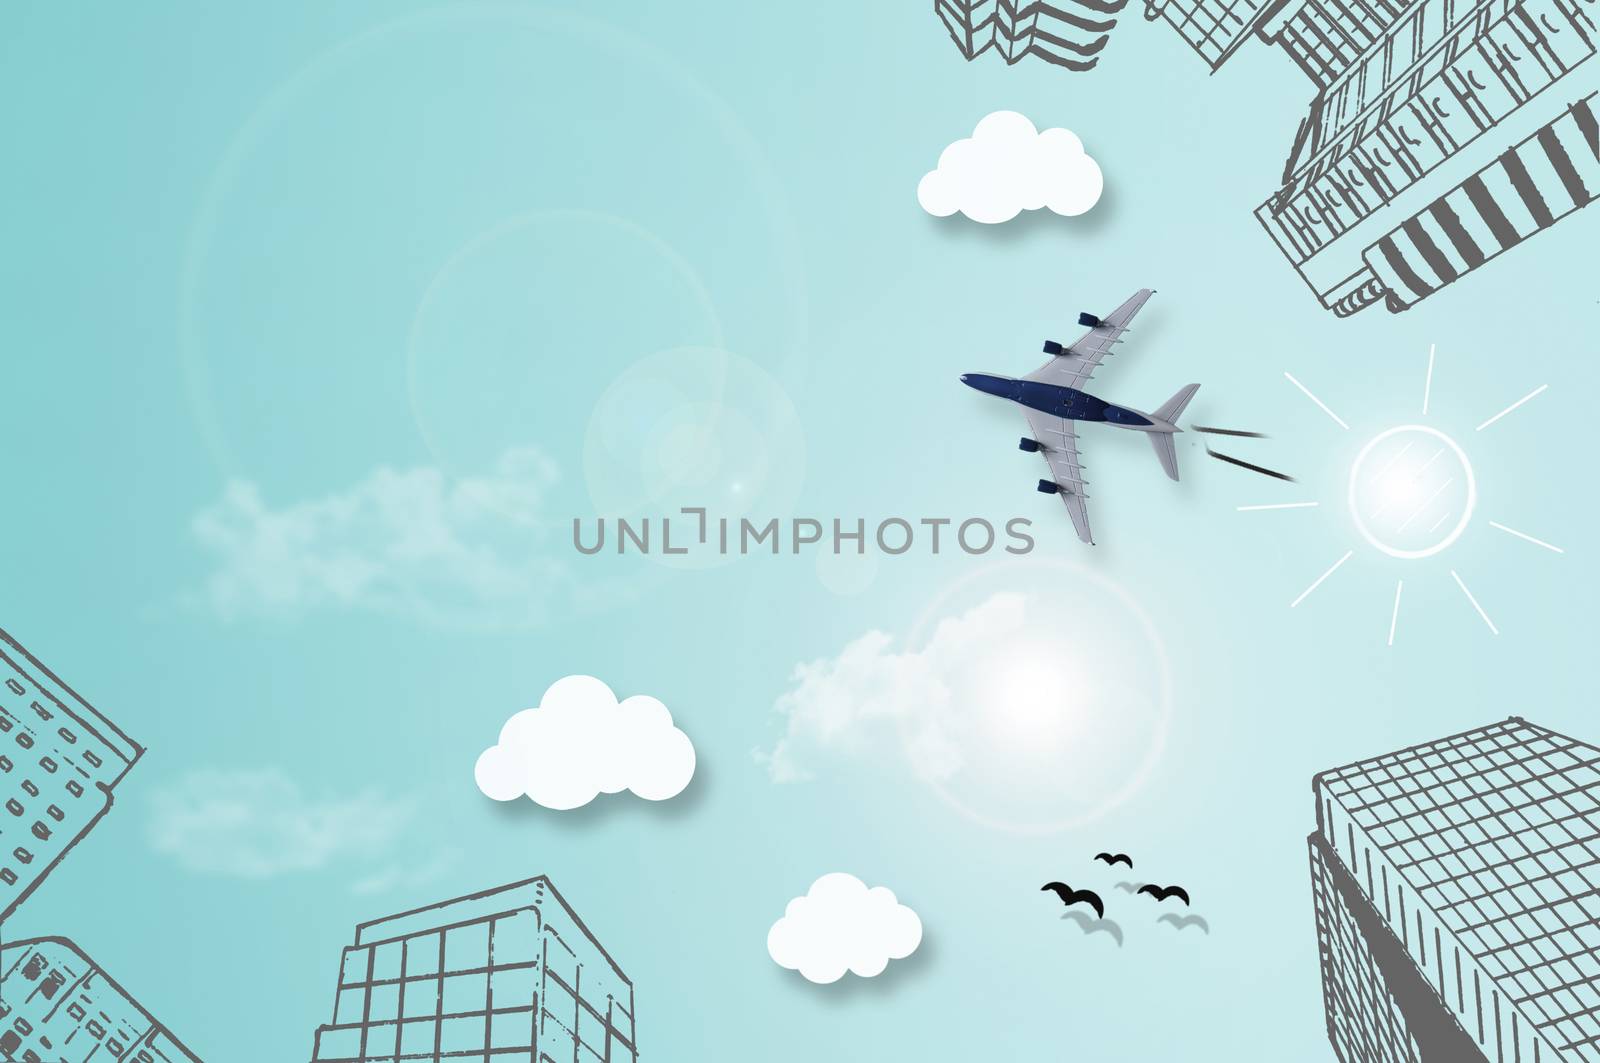 Big city skyscrapers sketch with plane flying over sky by unikpix